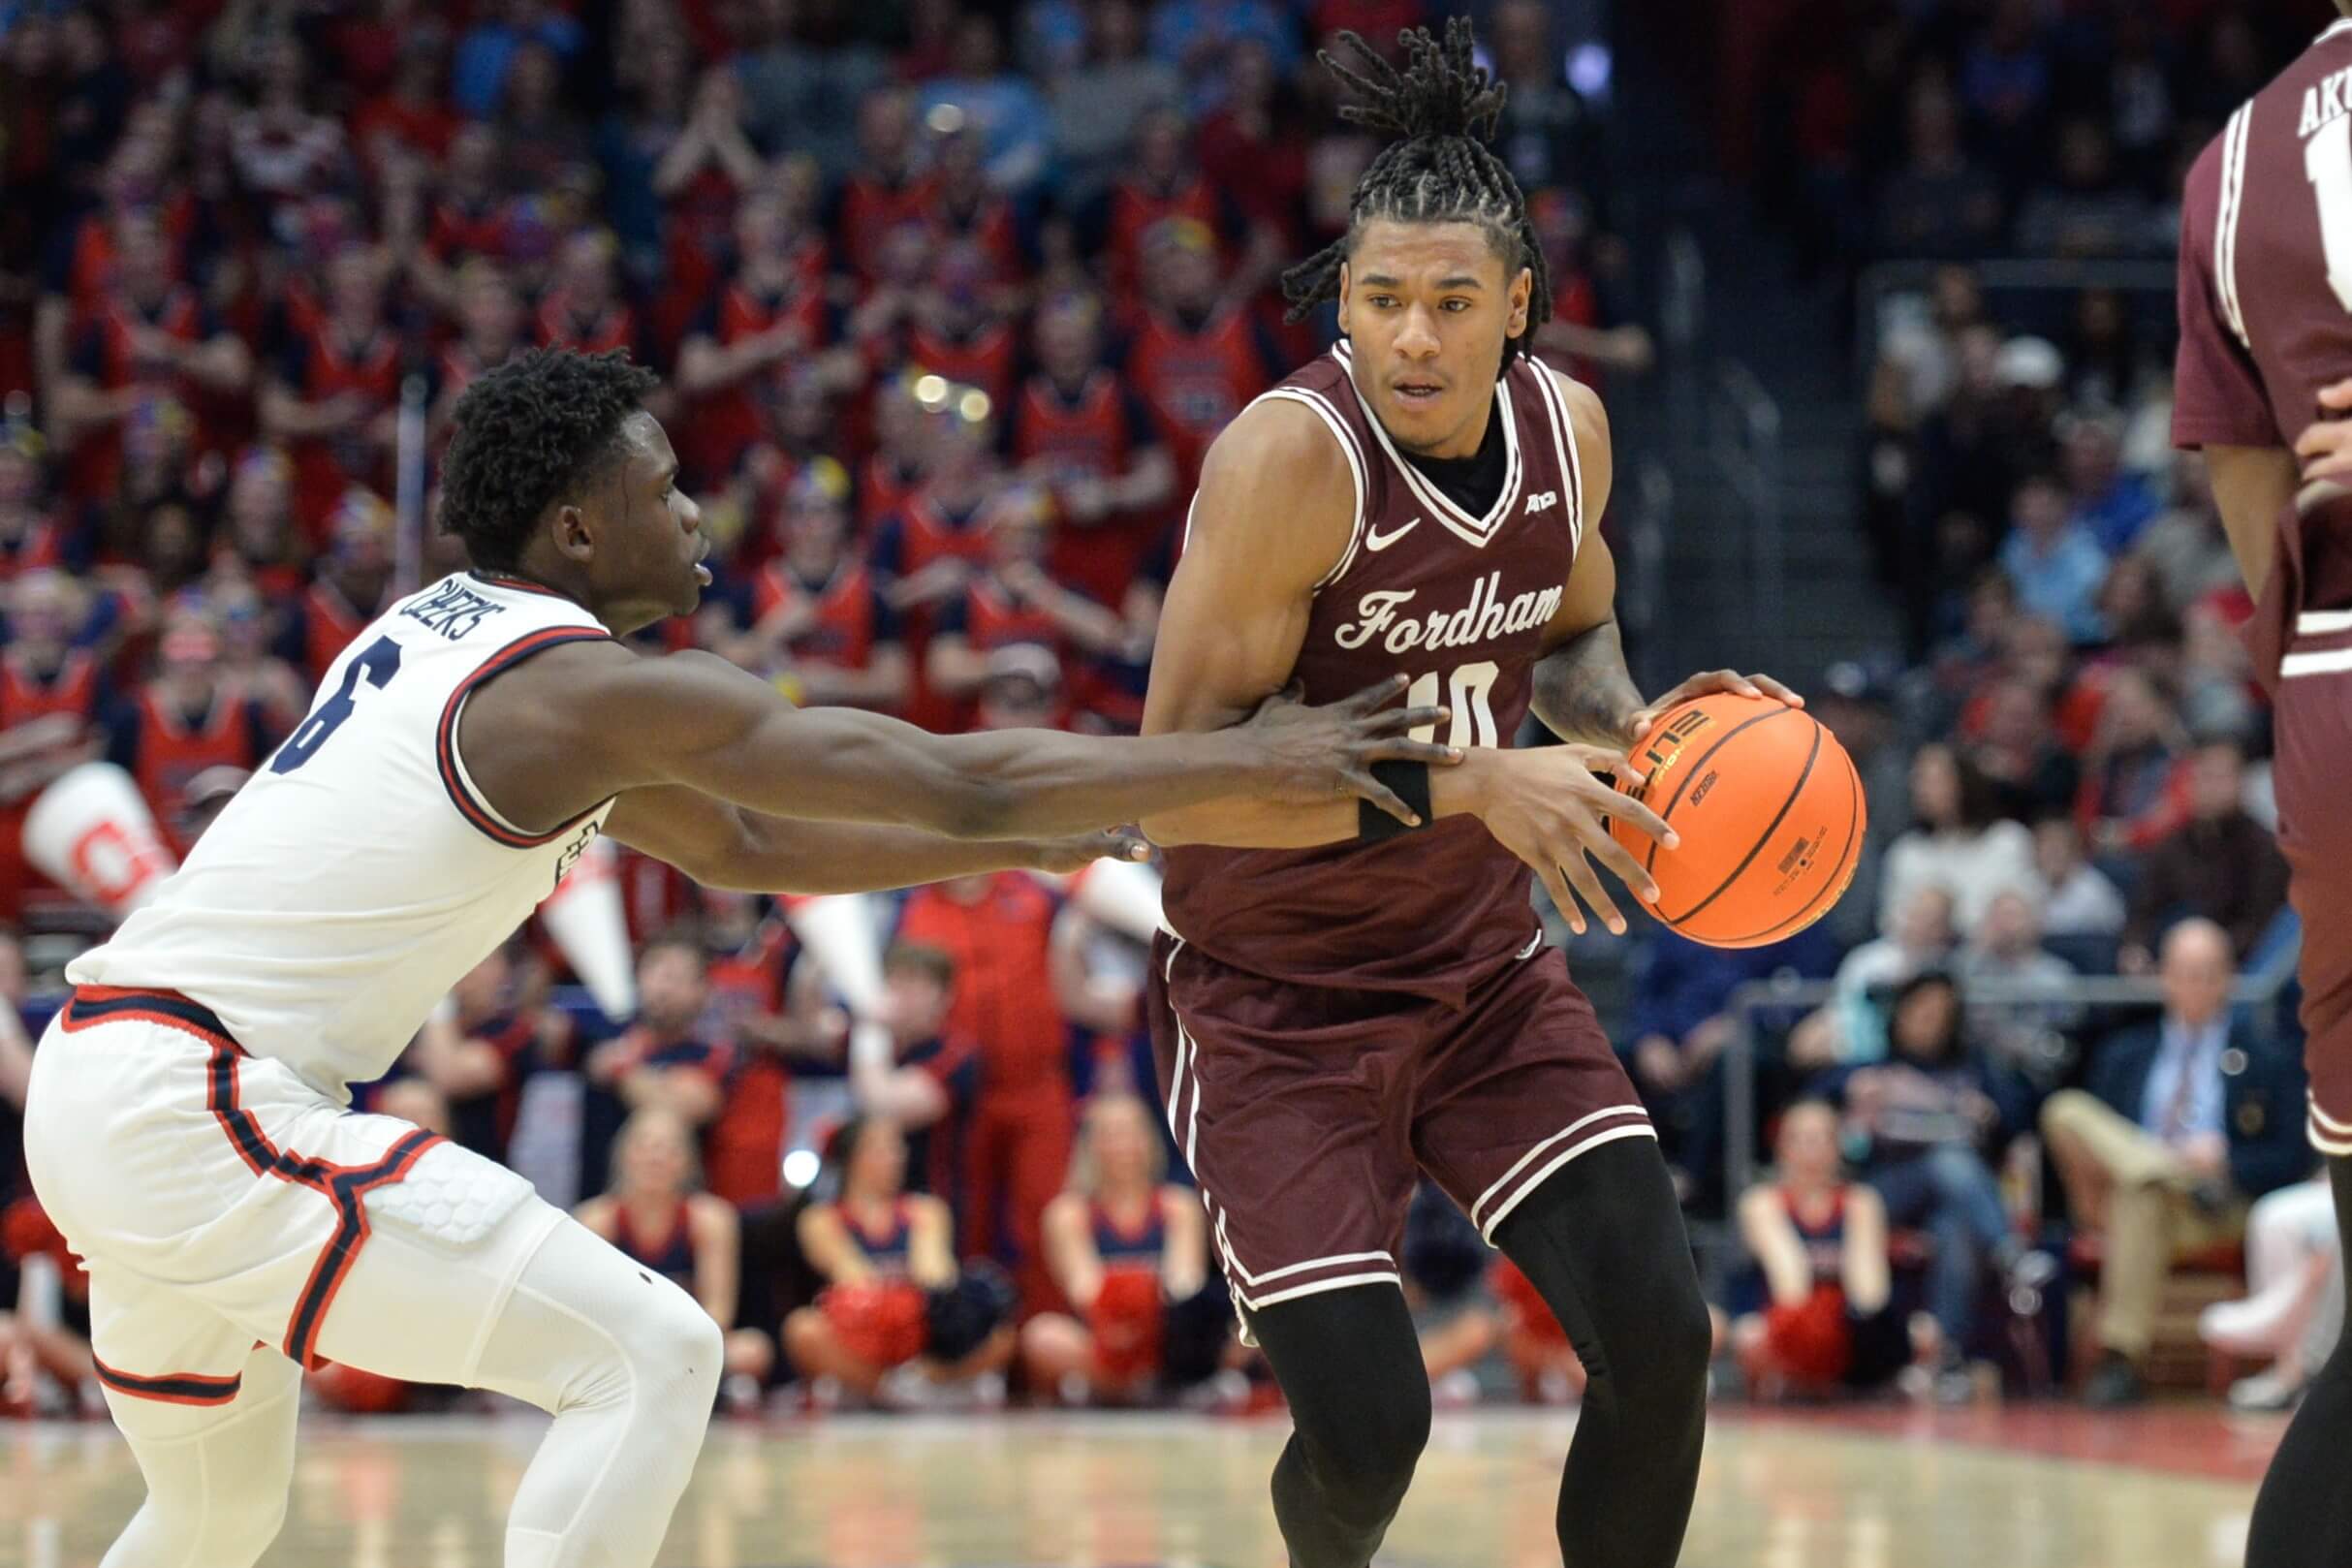 How To Bet - Duquesne vs Fordham Odds, Picks and Predictions: Rose Knows How to Beat Dukes Defense